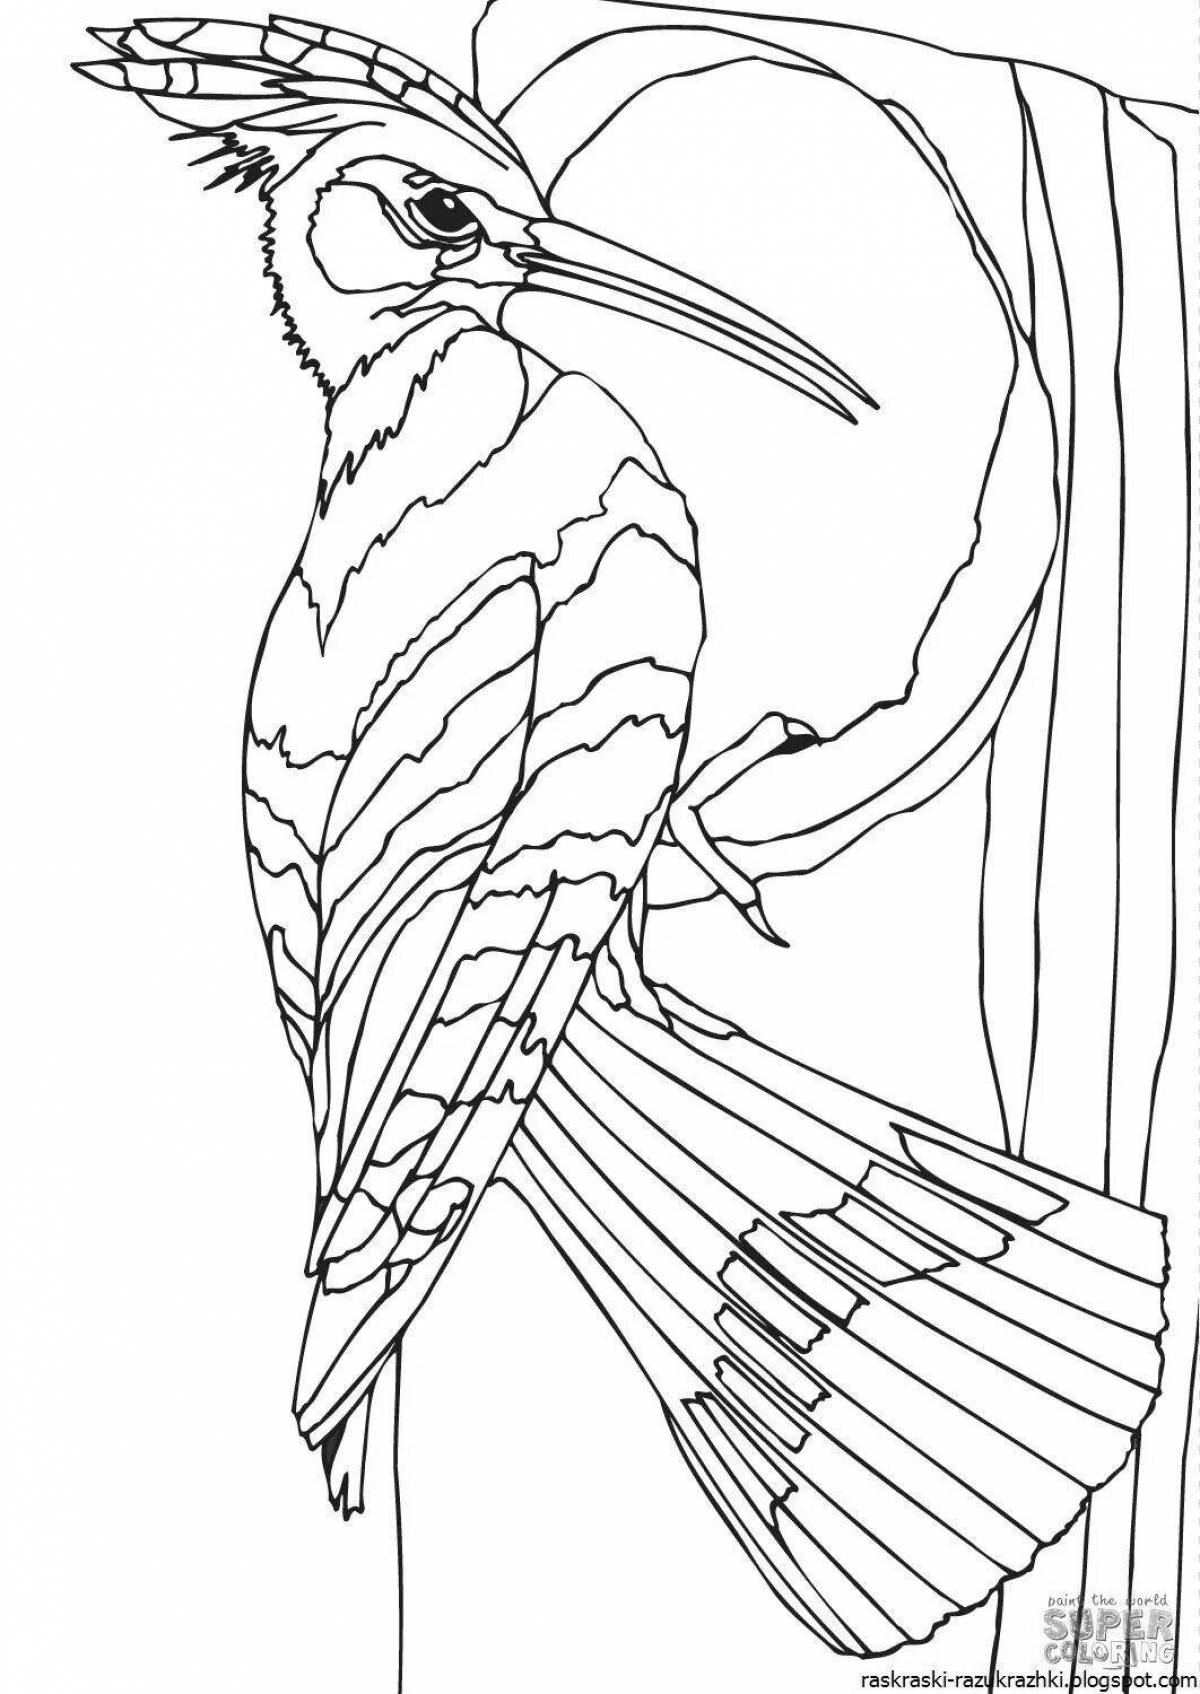 Charming woodpecker coloring book for 6-7 year olds